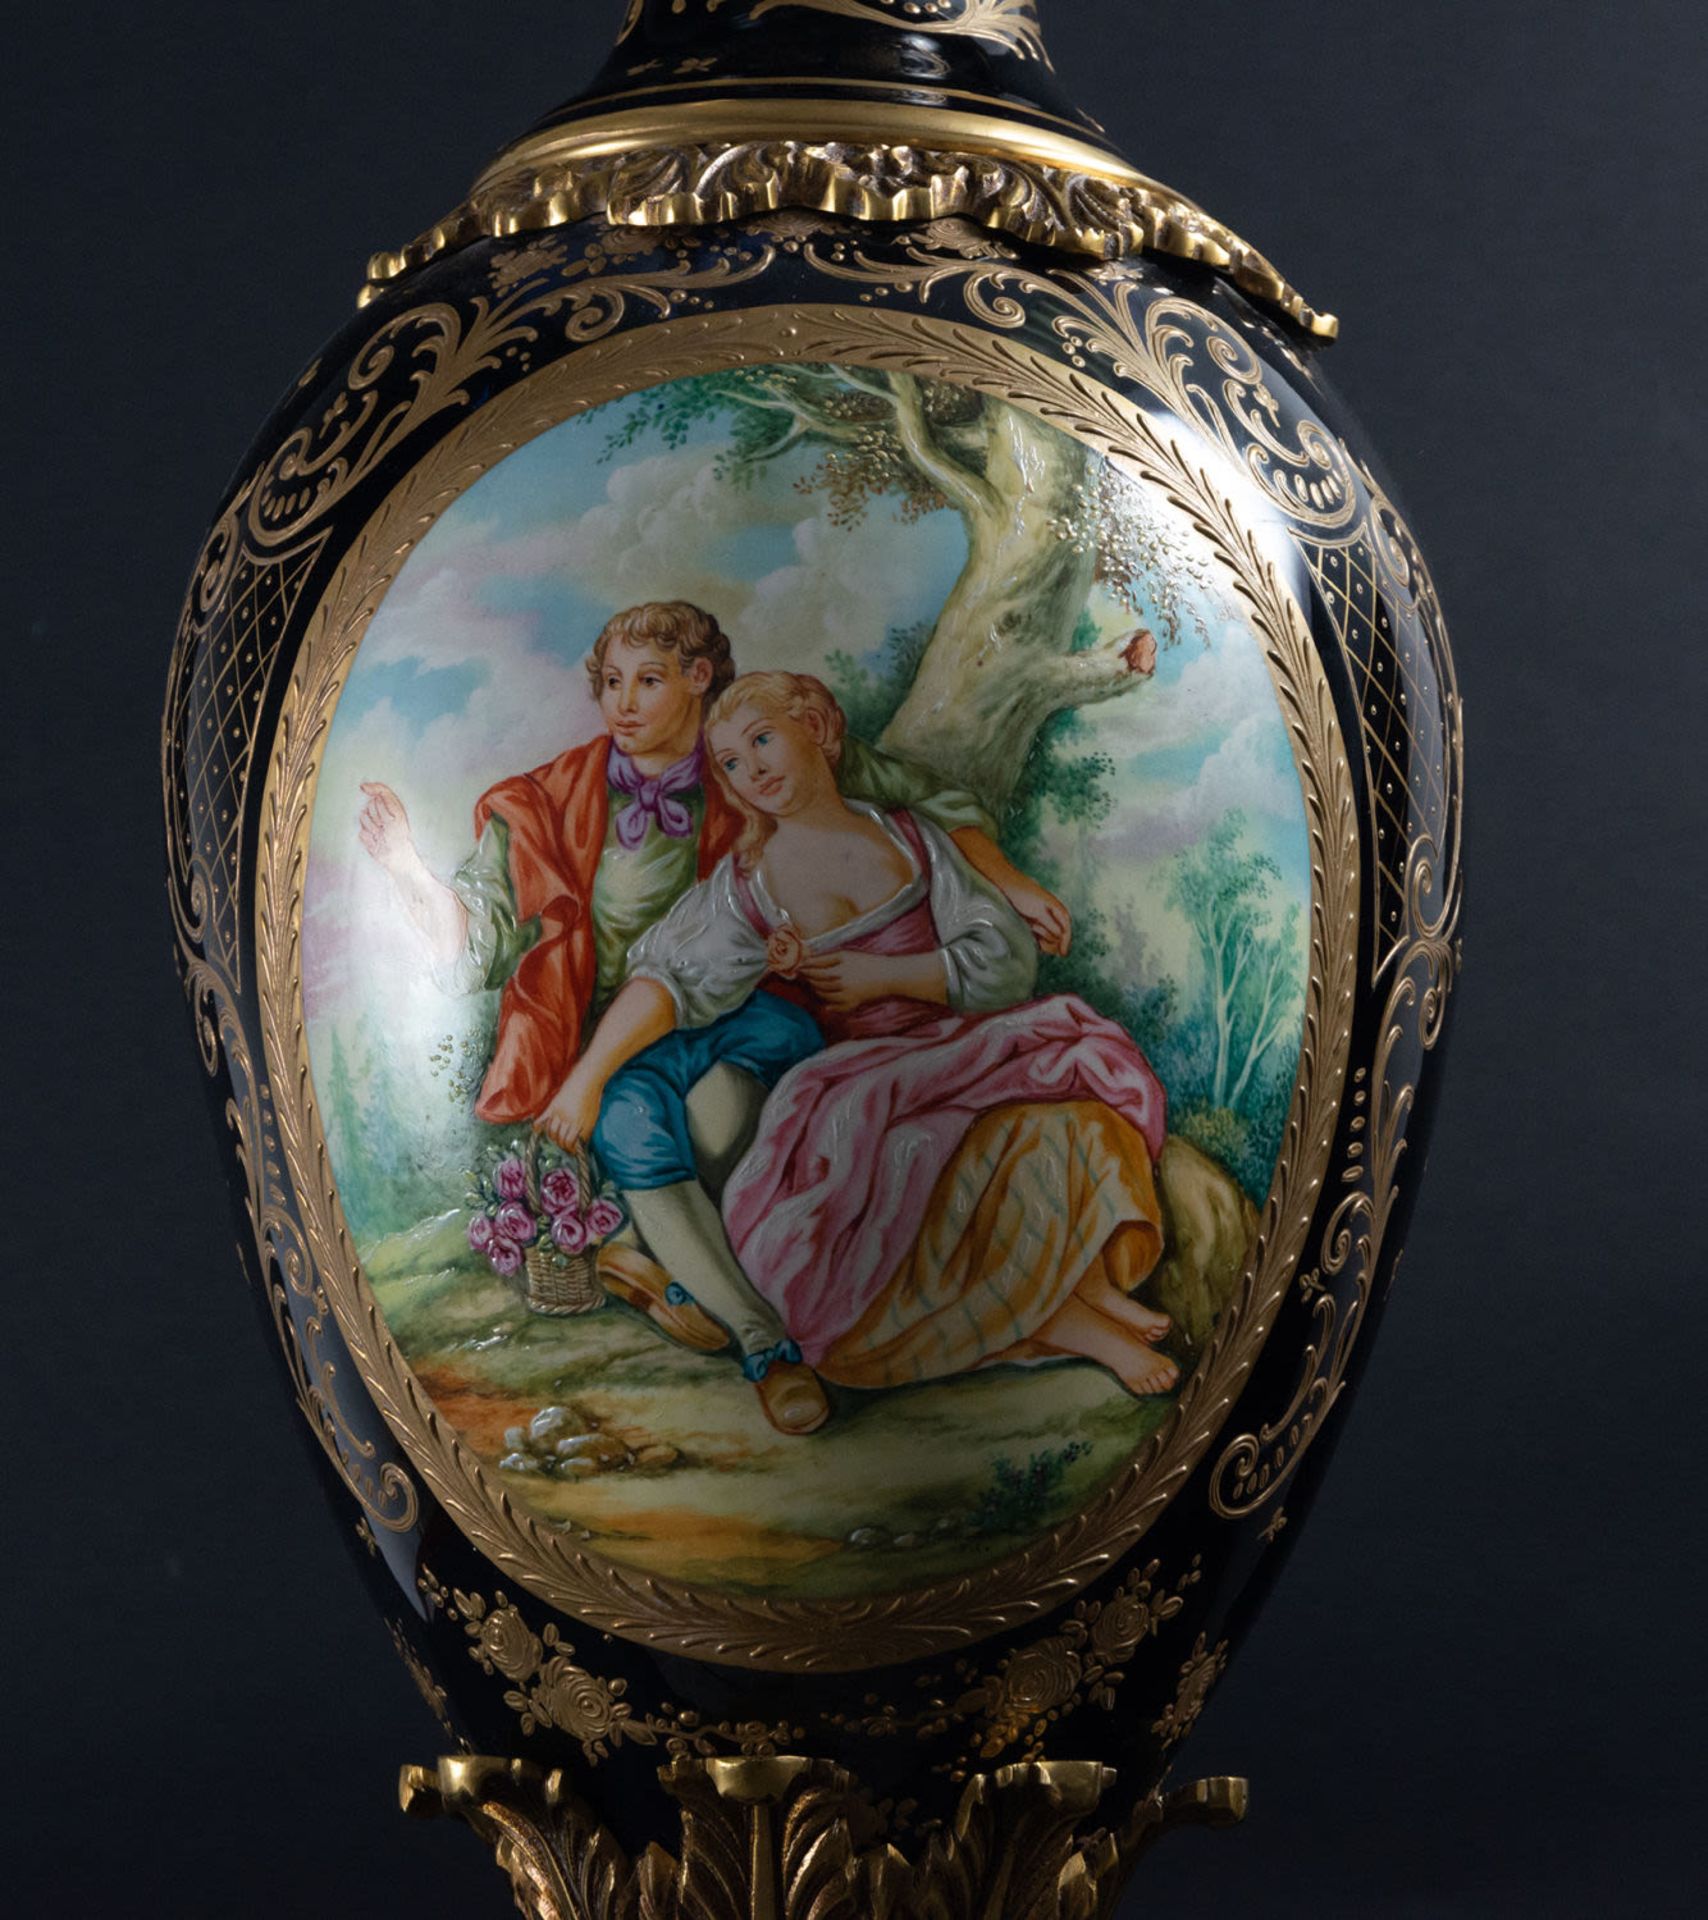 Pair of Large Vases in Polychrome Old Paris Tender Porcelain, late 19th century - Image 4 of 11